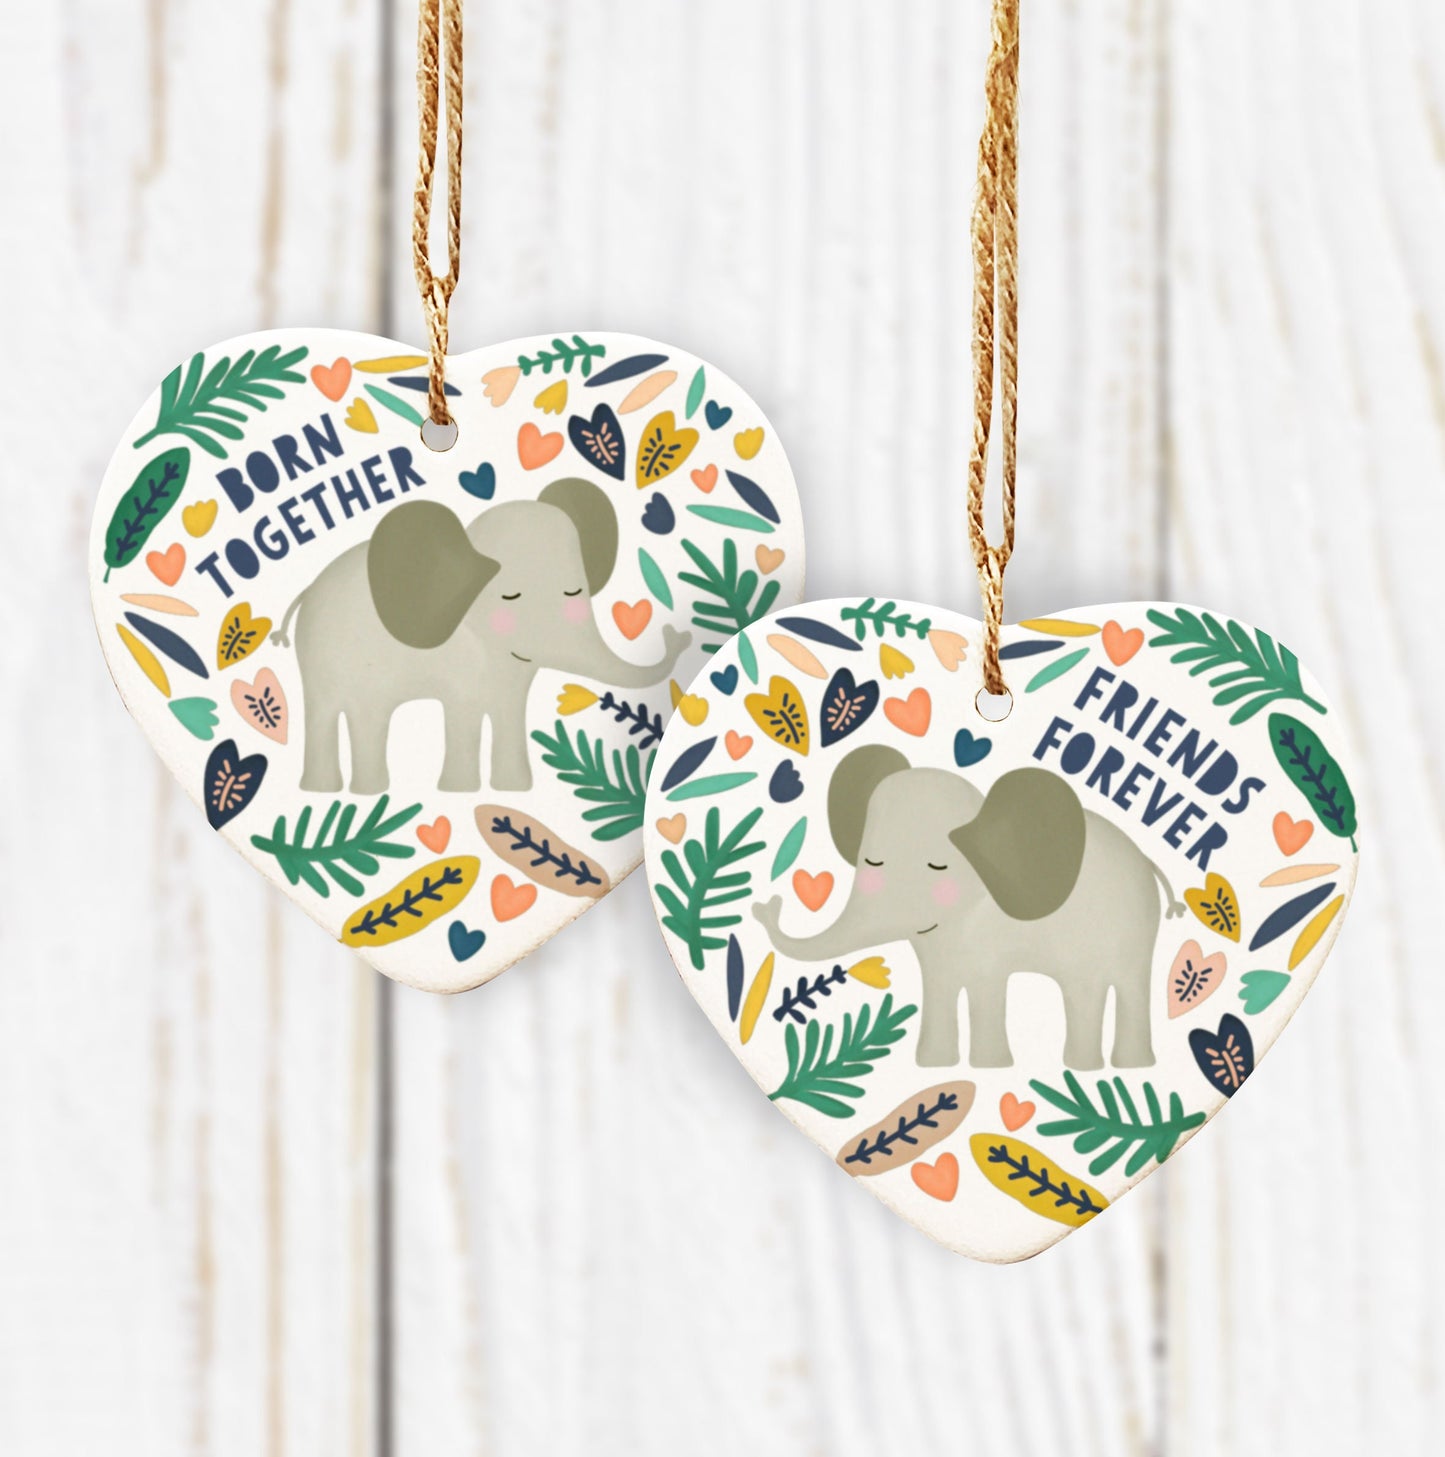 Personalised Twin Ceramic Hearts Gift. Twin Elephant Gifts. Born Together Friends Forever Elephant Twin Ceramic Hearts. Twin Gift.